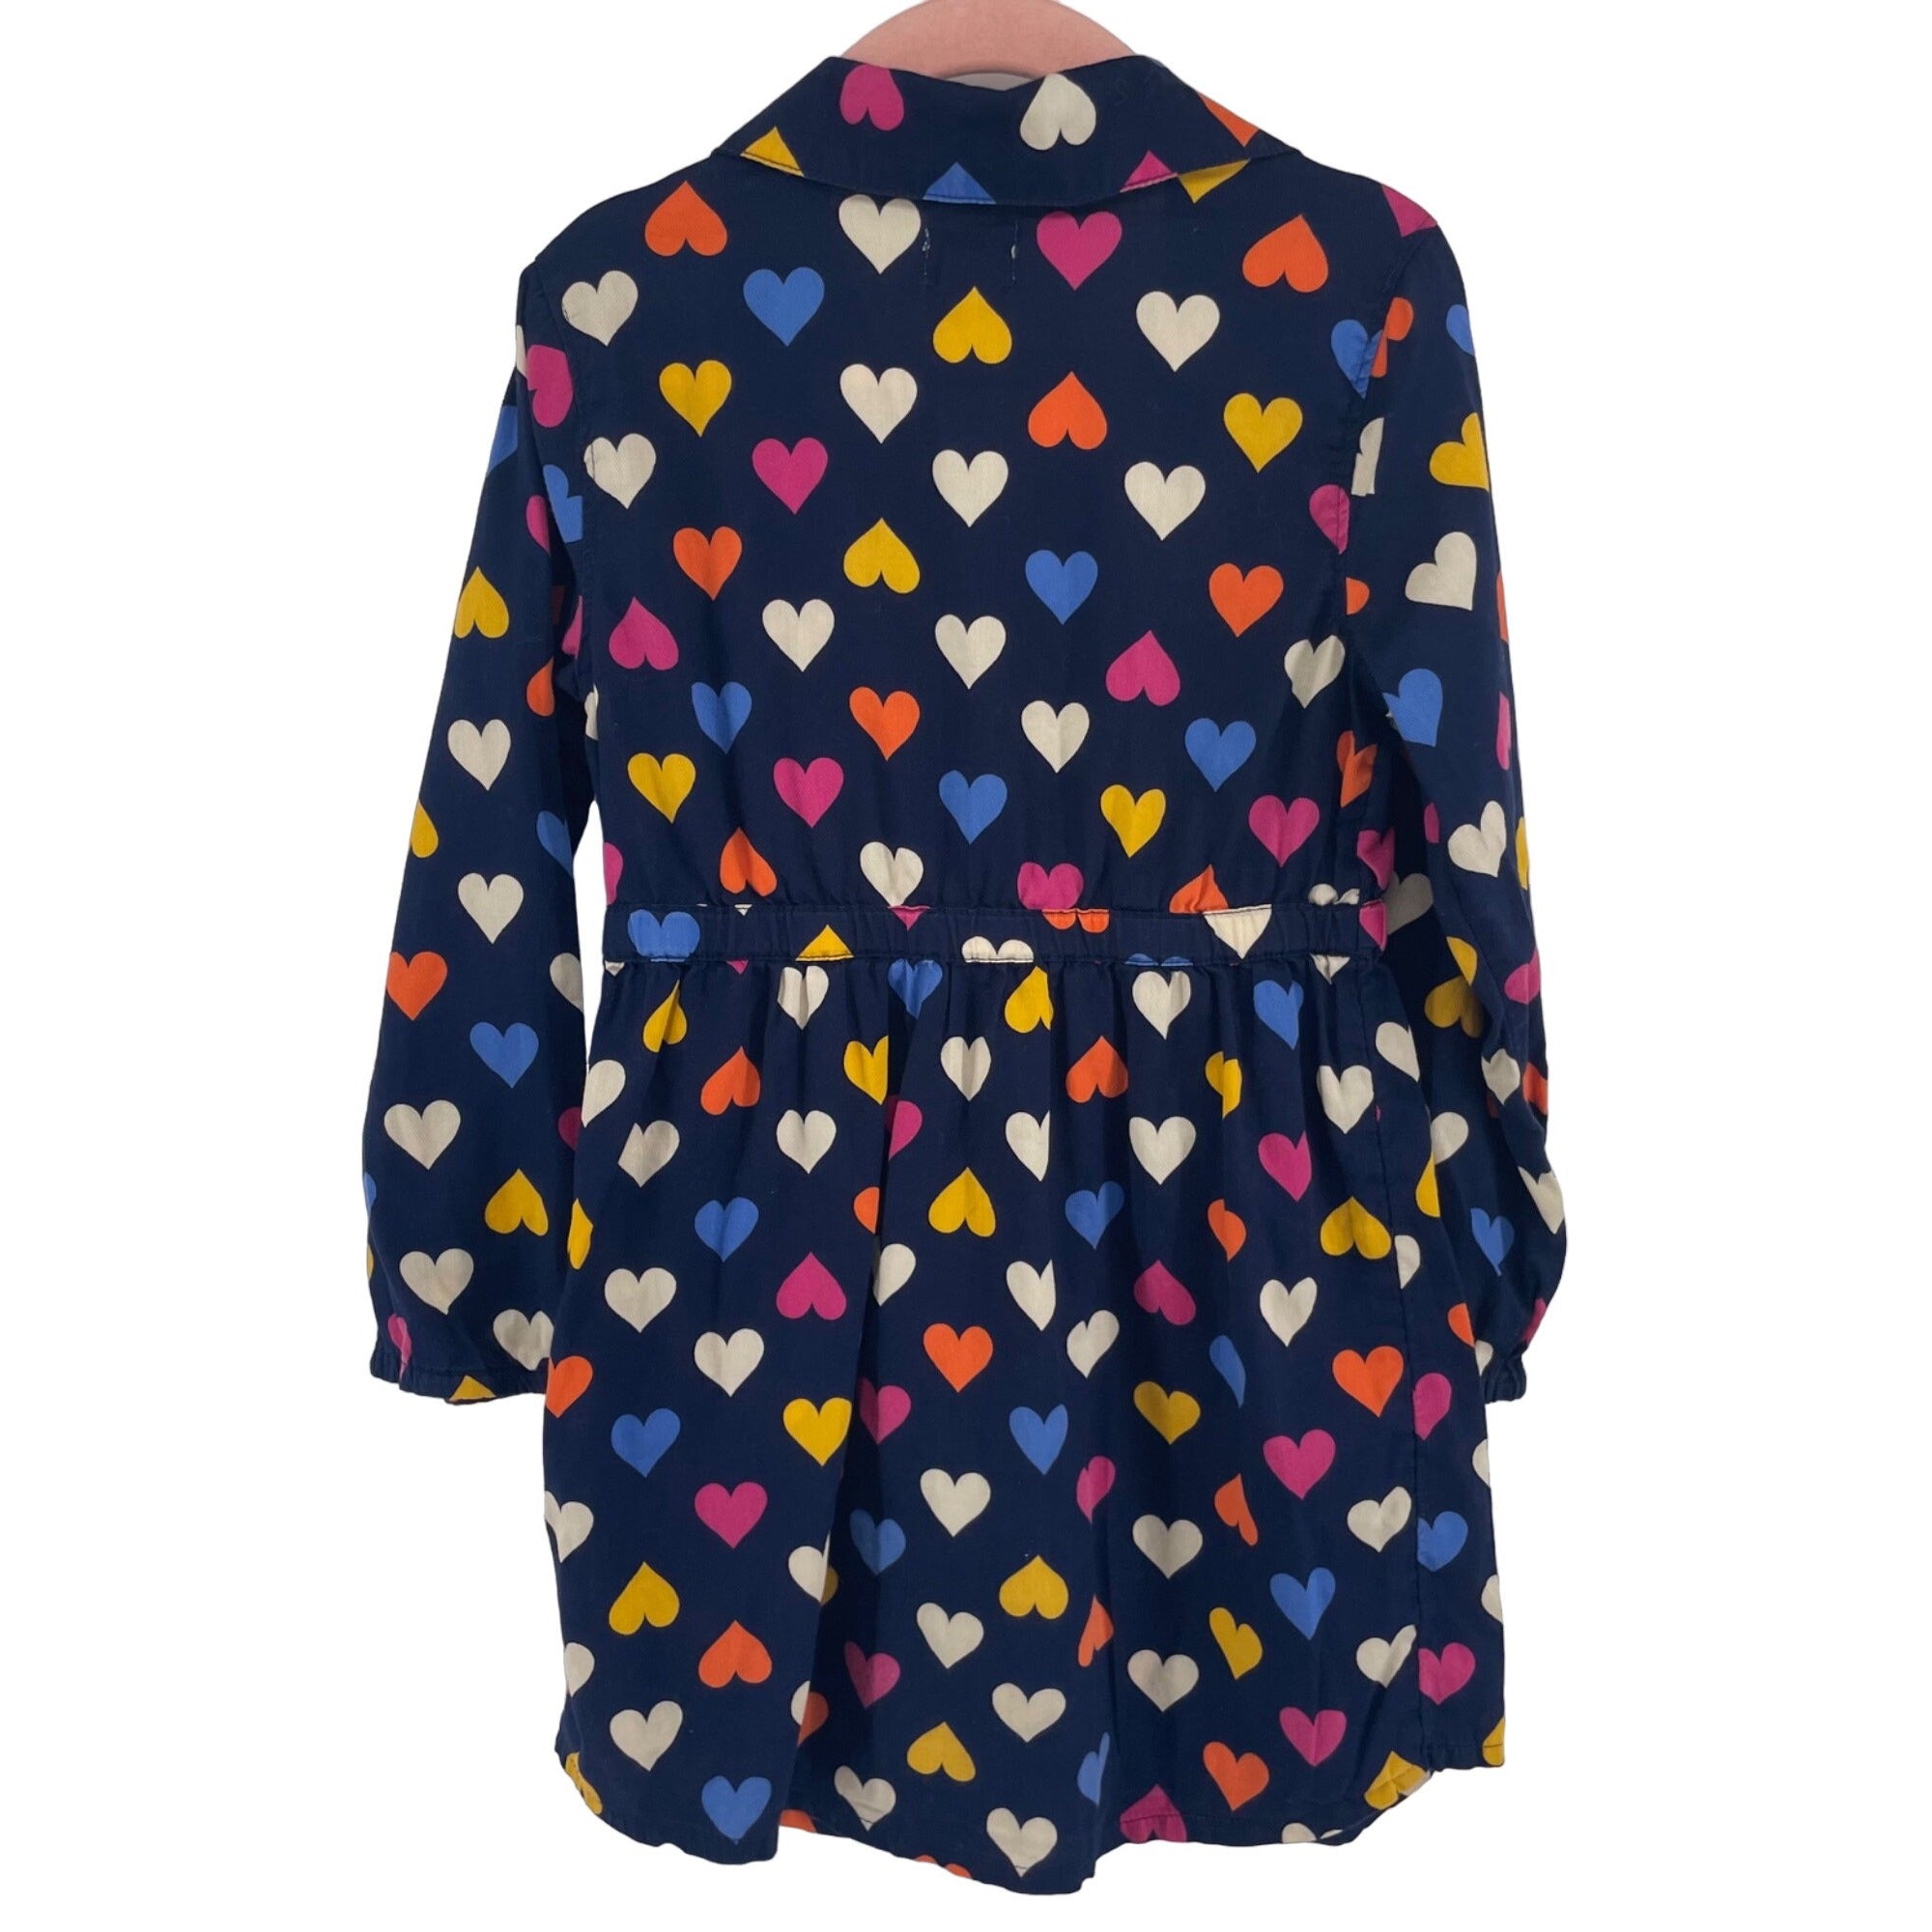 Old Navy Girl's Size 5T Navy Blue & Multi-Colored Heart Print Long-Sleeved Dress